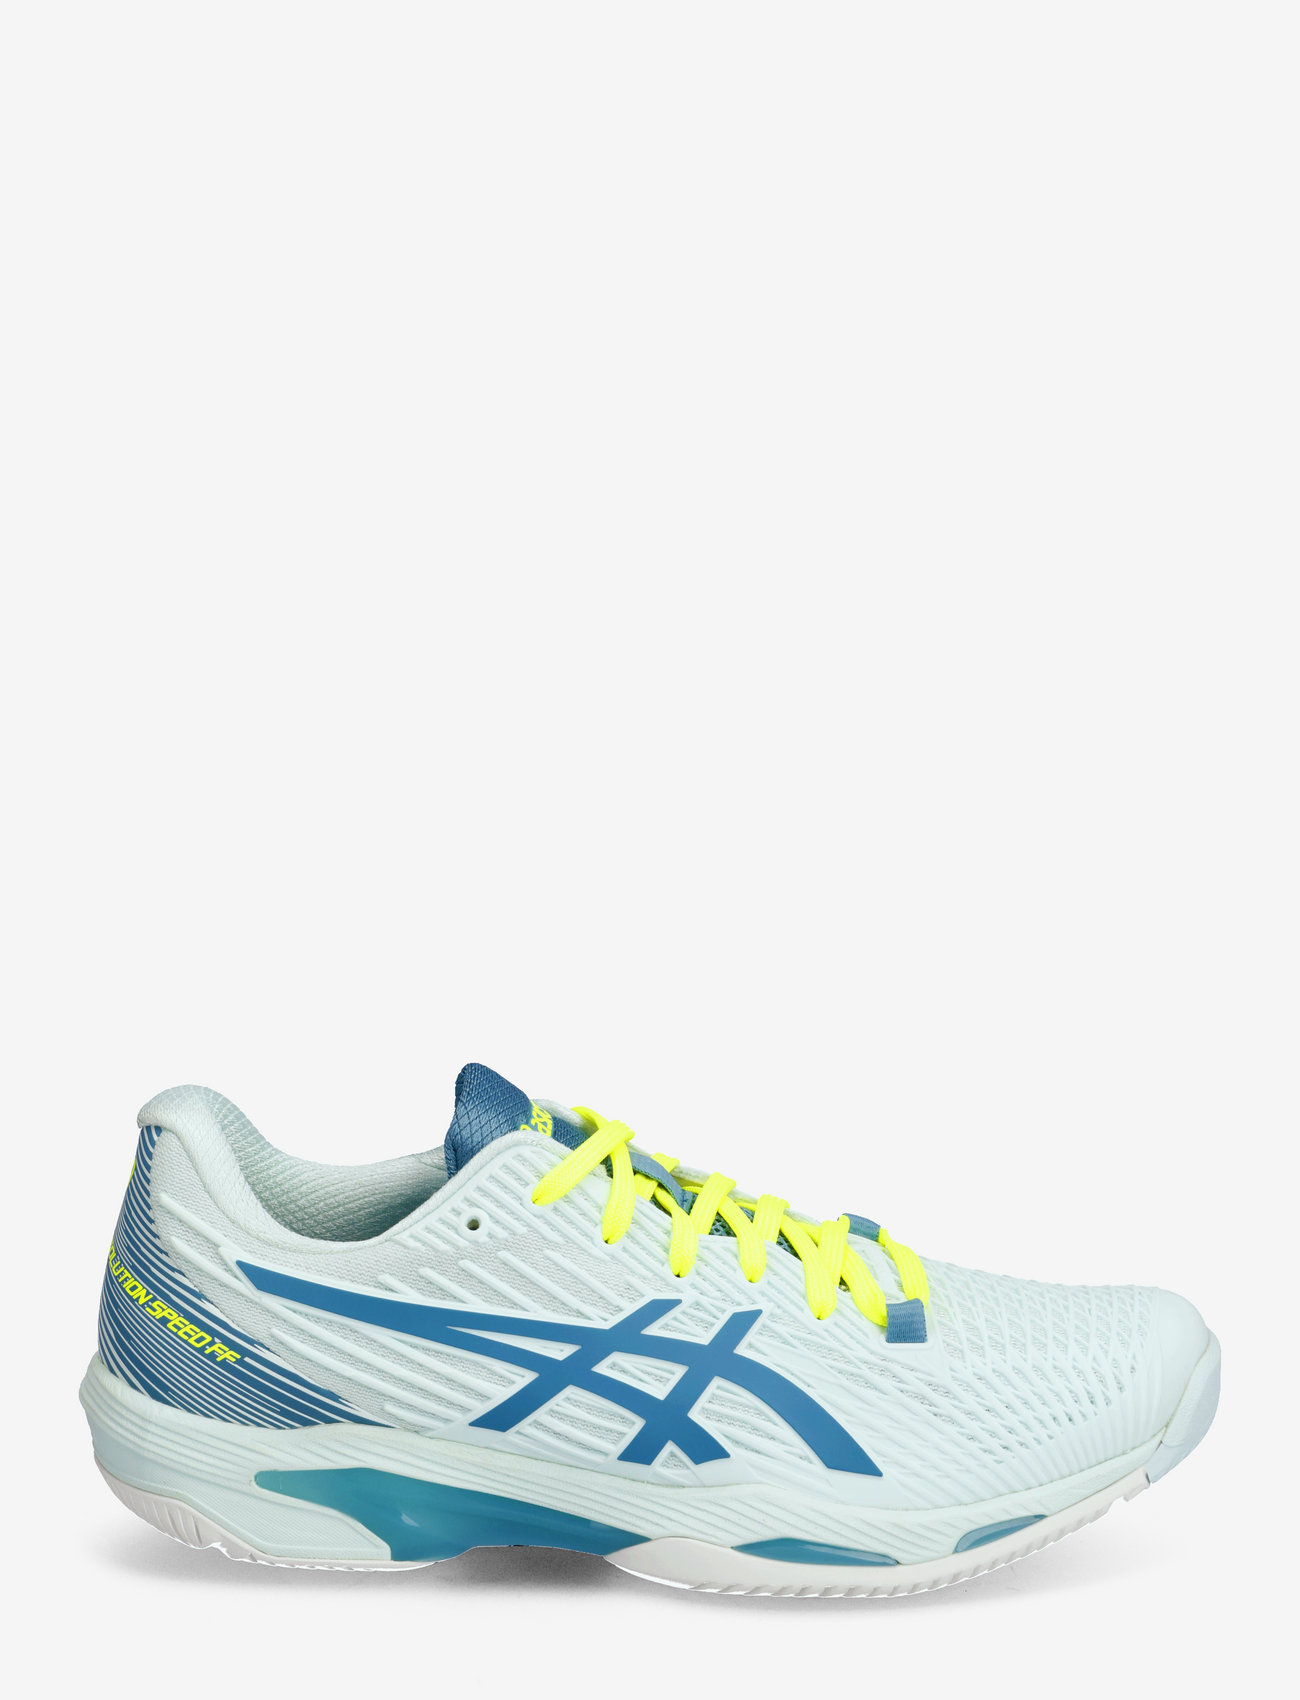 Asics - SOLUTION SPEED FF 2 - racketsports shoes - soothing sea/gris blue - 1